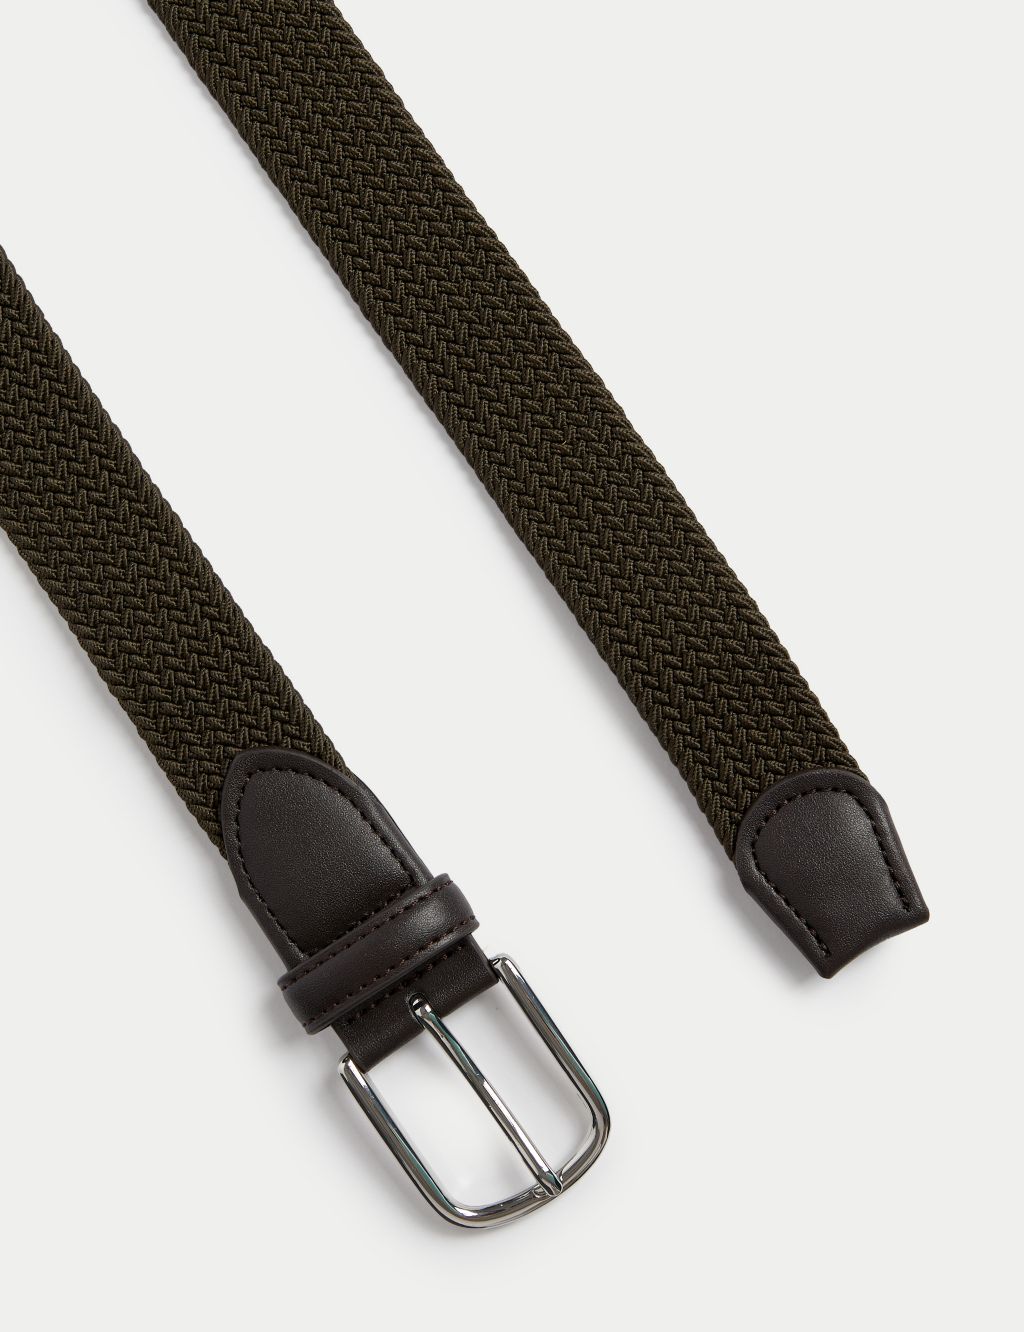 Stretch Woven Casual Belt image 2